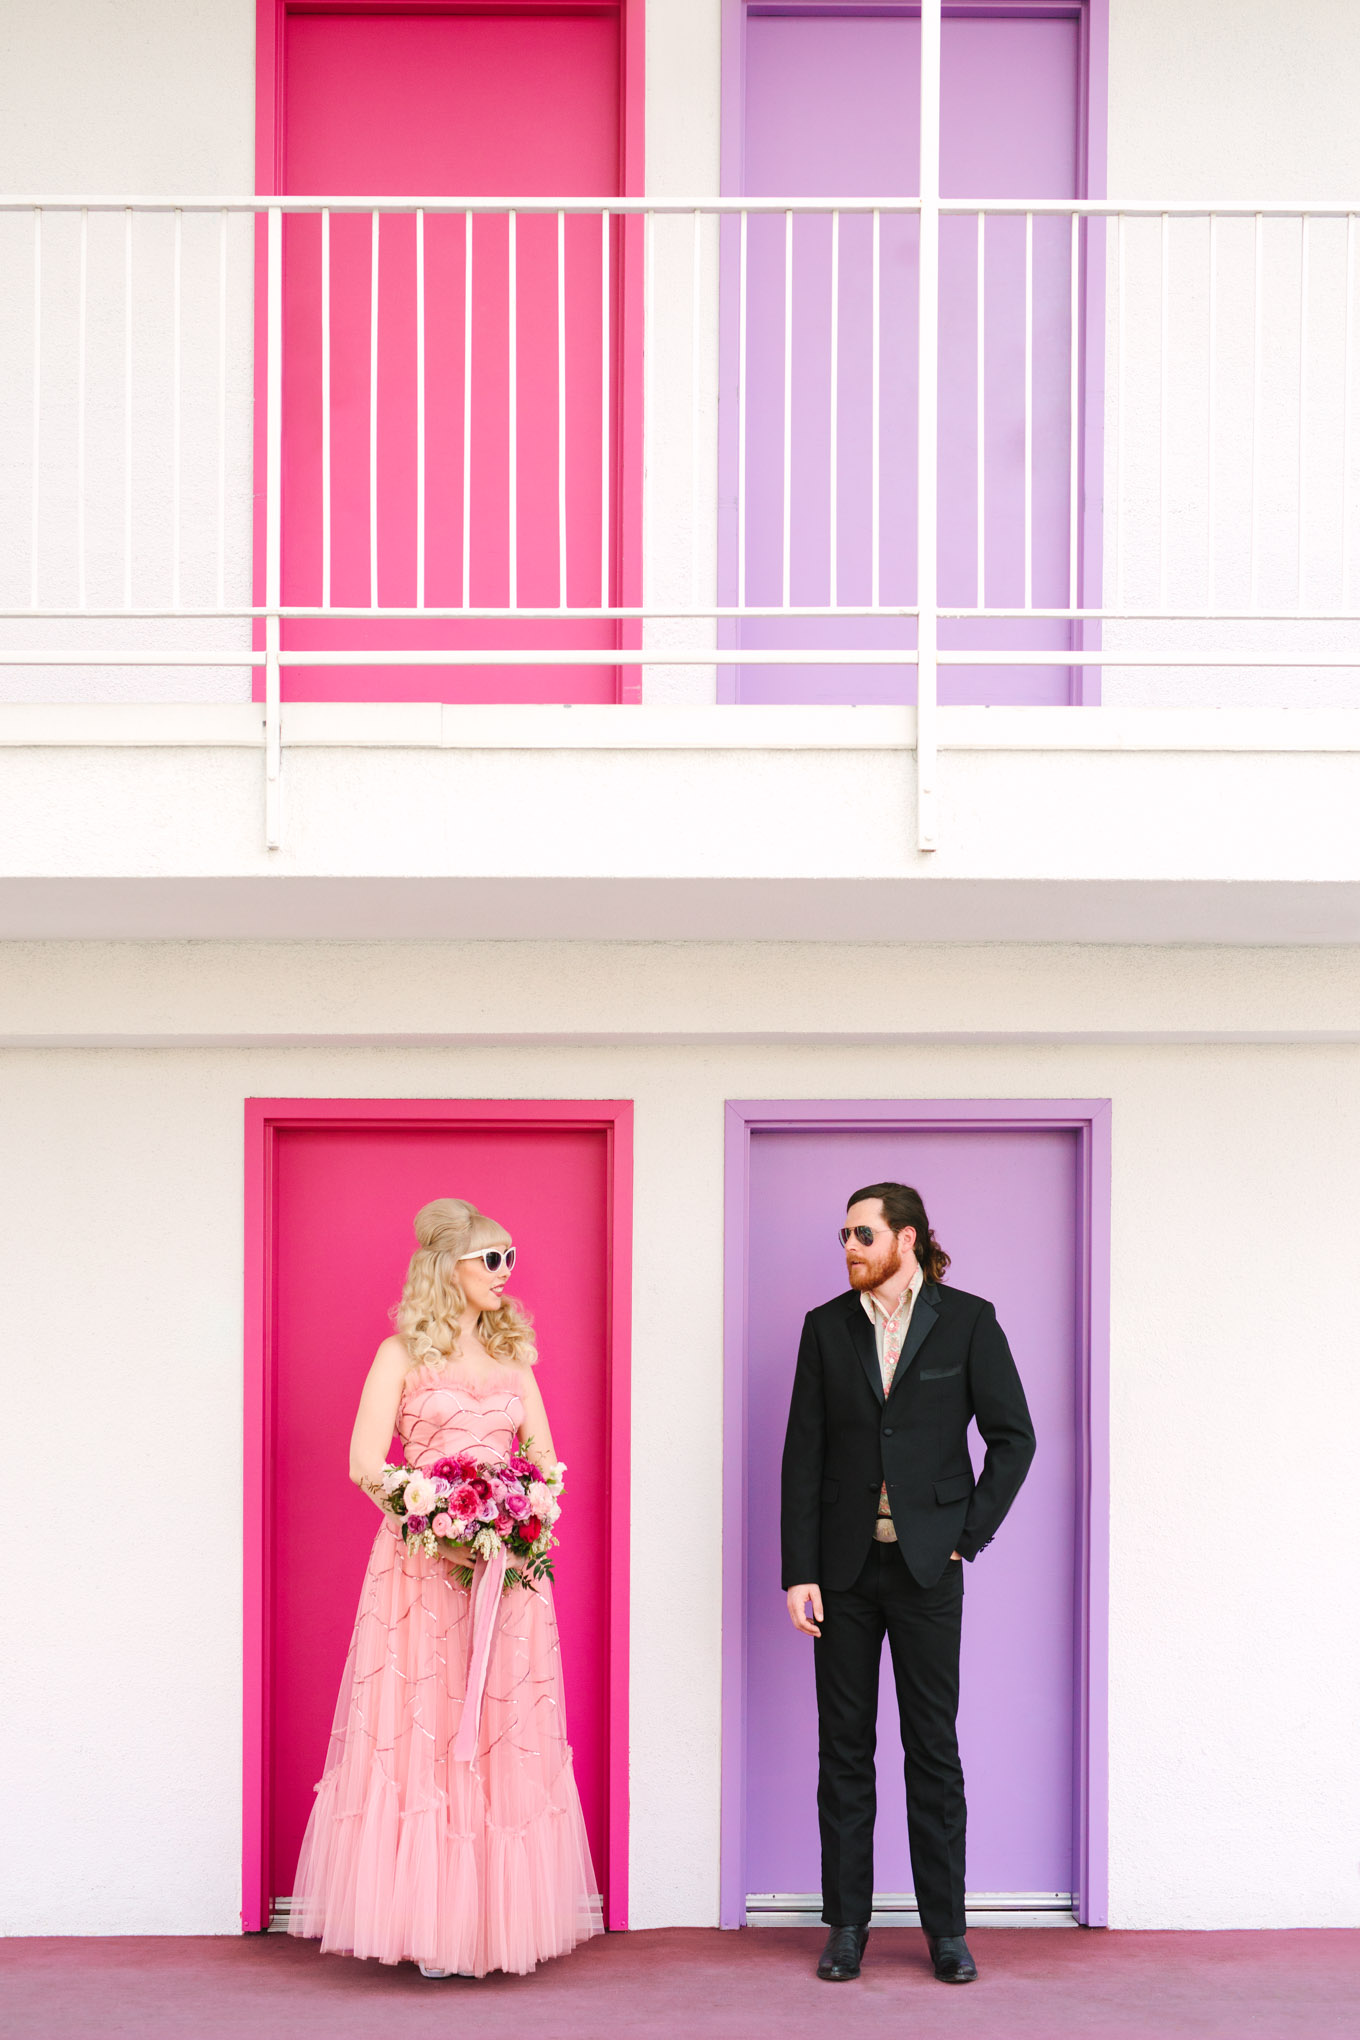 Retro couple with pink and lavender Saguaro Hotel. Modern vintage-inspired Palm Springs engagement session with a 1960s pink Cadillac, retro clothing, and flowers by Shindig Chic. | Colorful and elevated wedding inspiration for fun-loving couples in Southern California | #engagementsession #PalmSpringsengagement #vintageweddingdress #floralcar #pinkcar   Source: Mary Costa Photography | Los Angeles